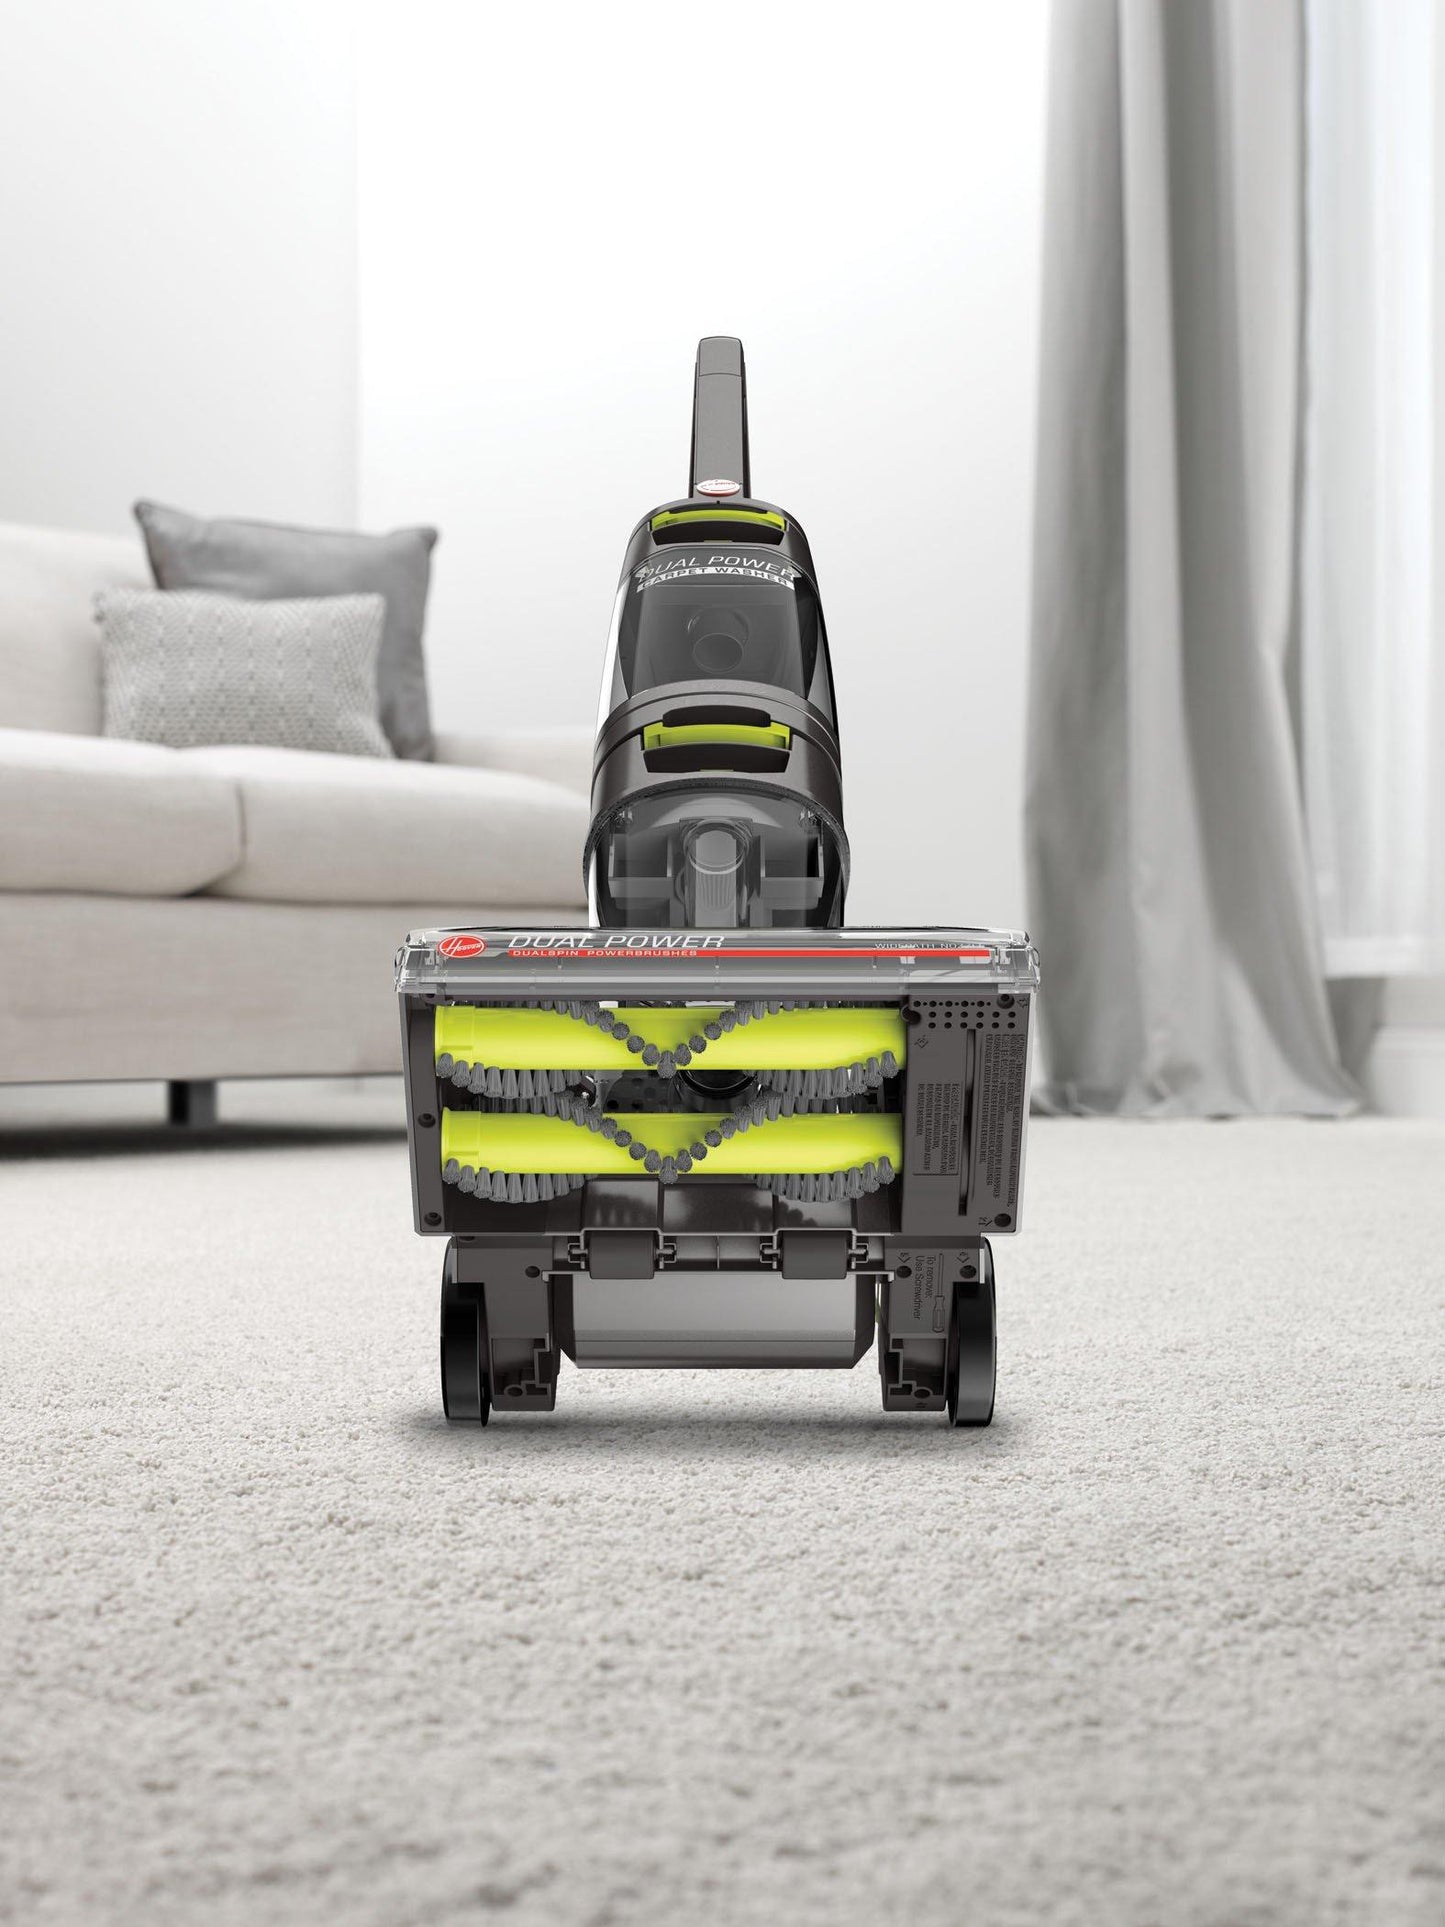 Reconditioned Dual Power Carpet Cleaner